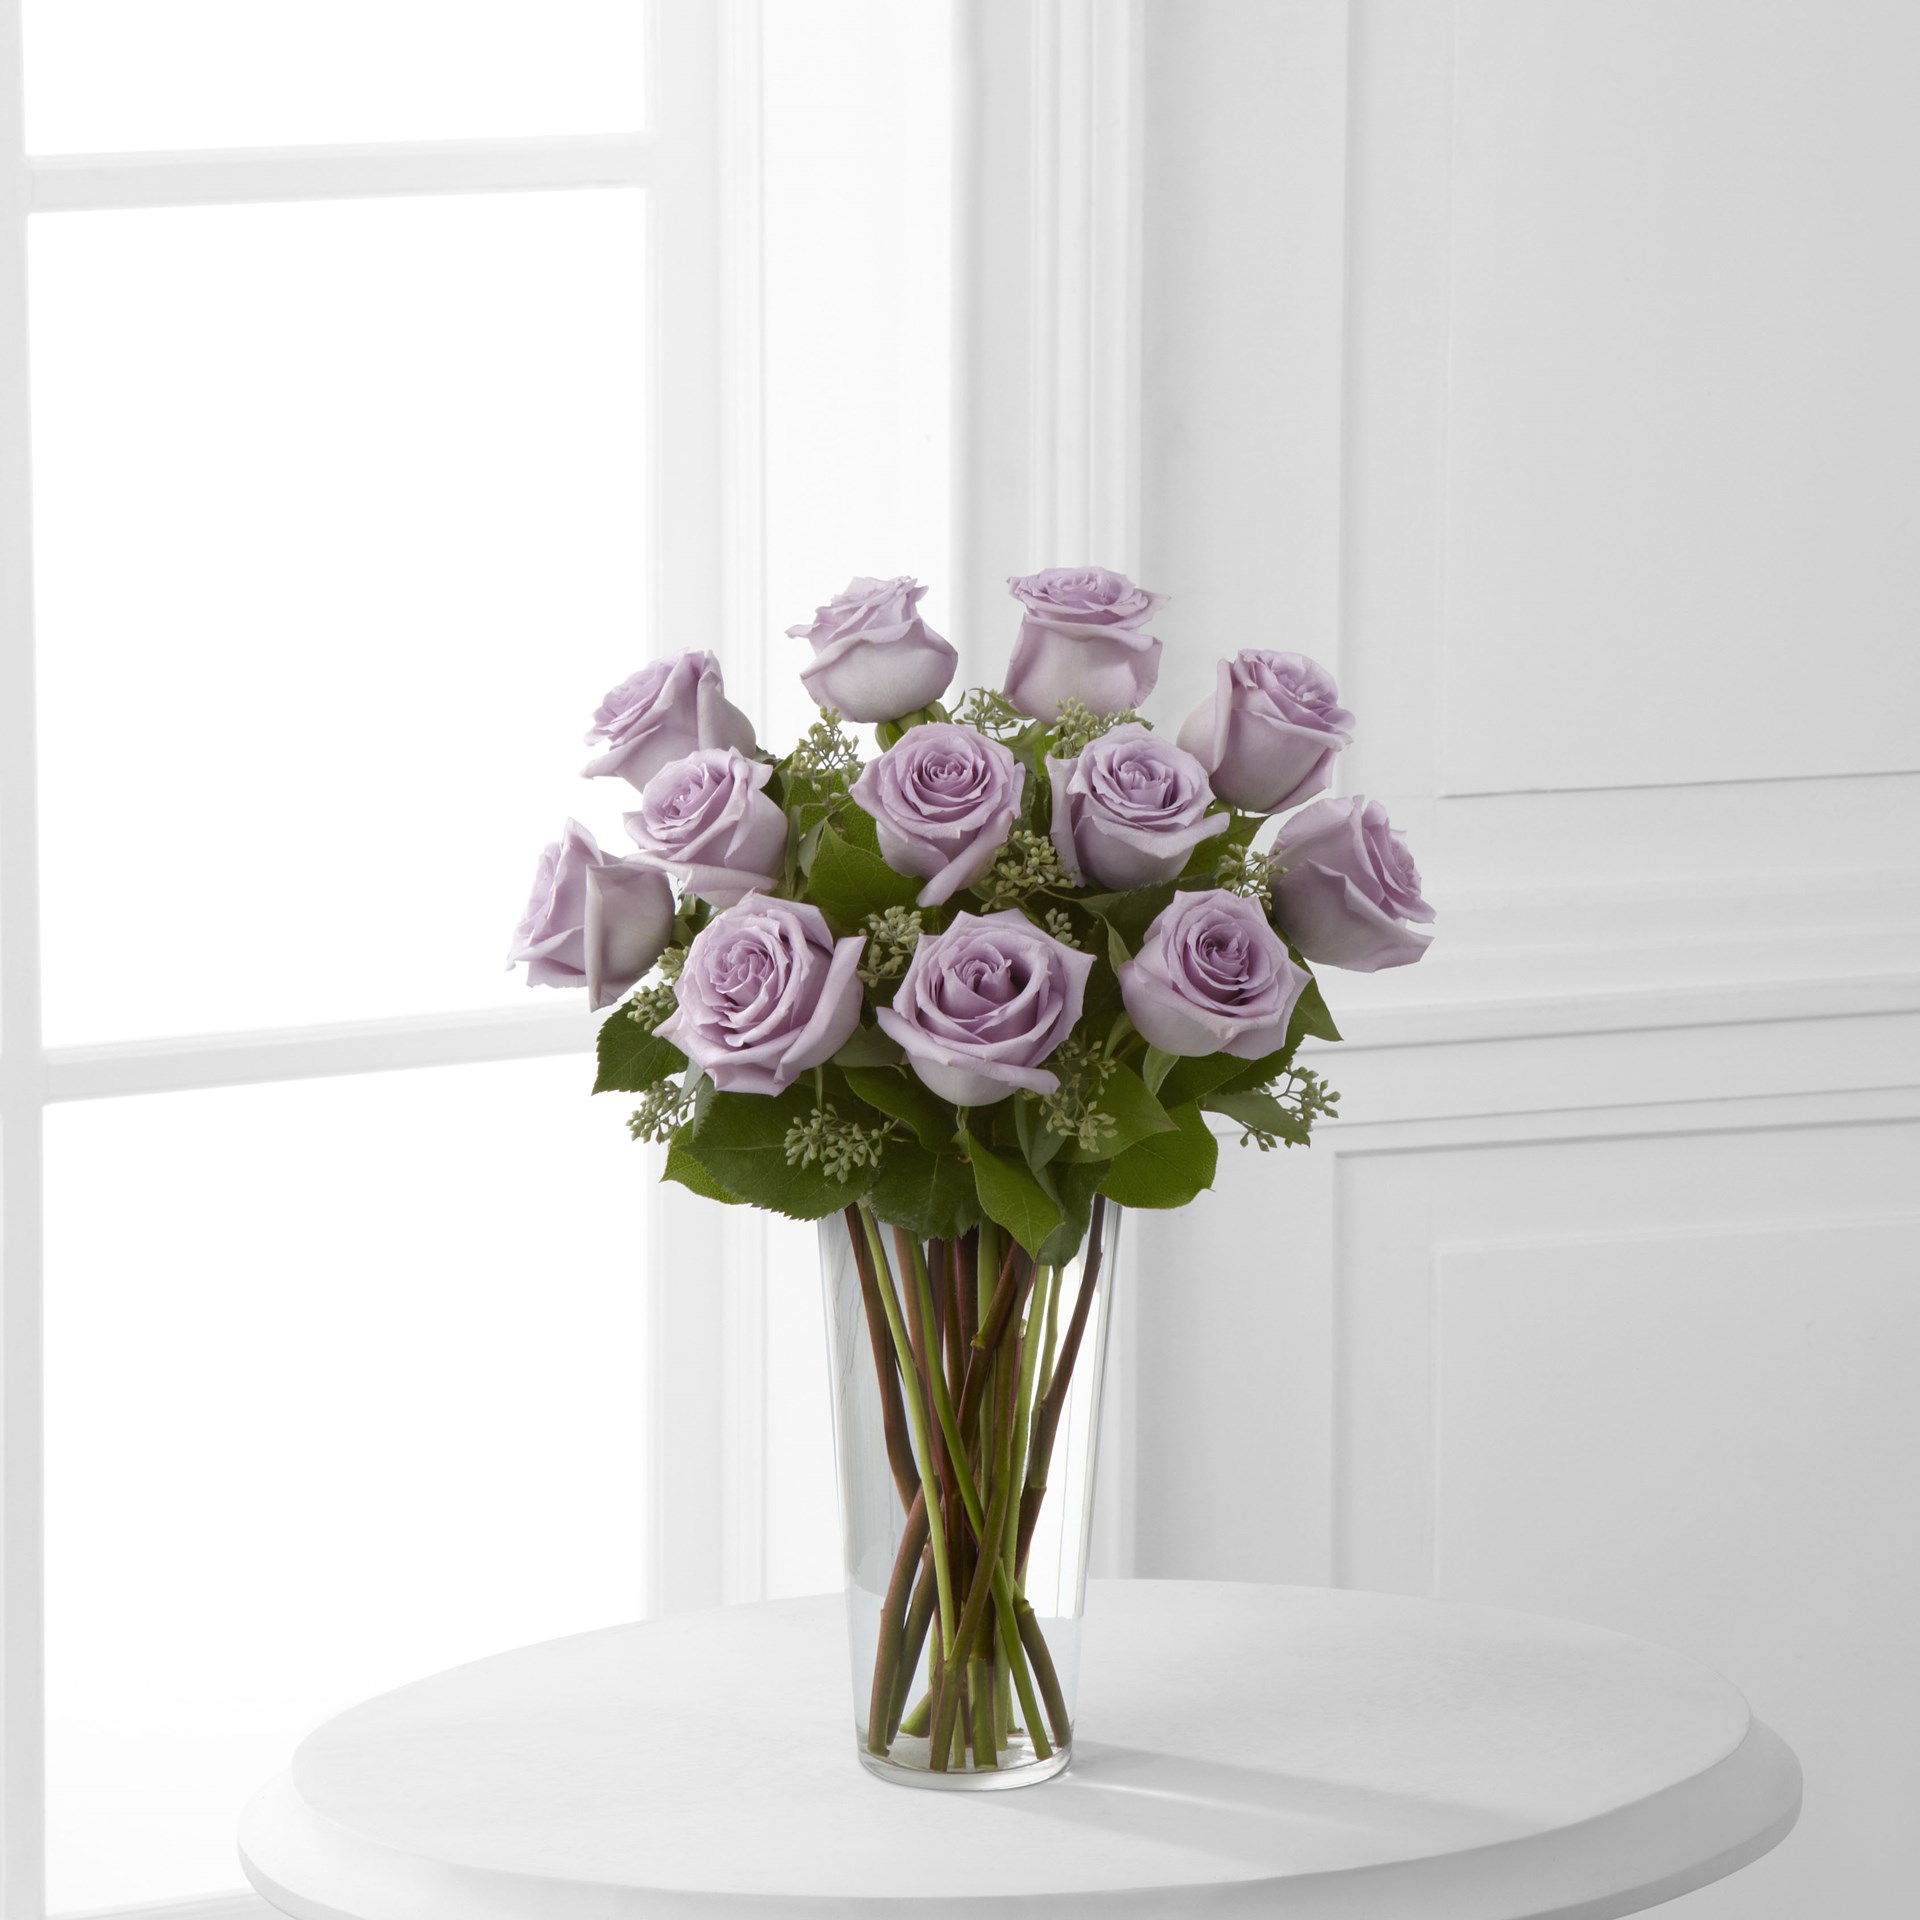 product image for The Lavender Rose Bouquet by FTD - VASE INCLUDED